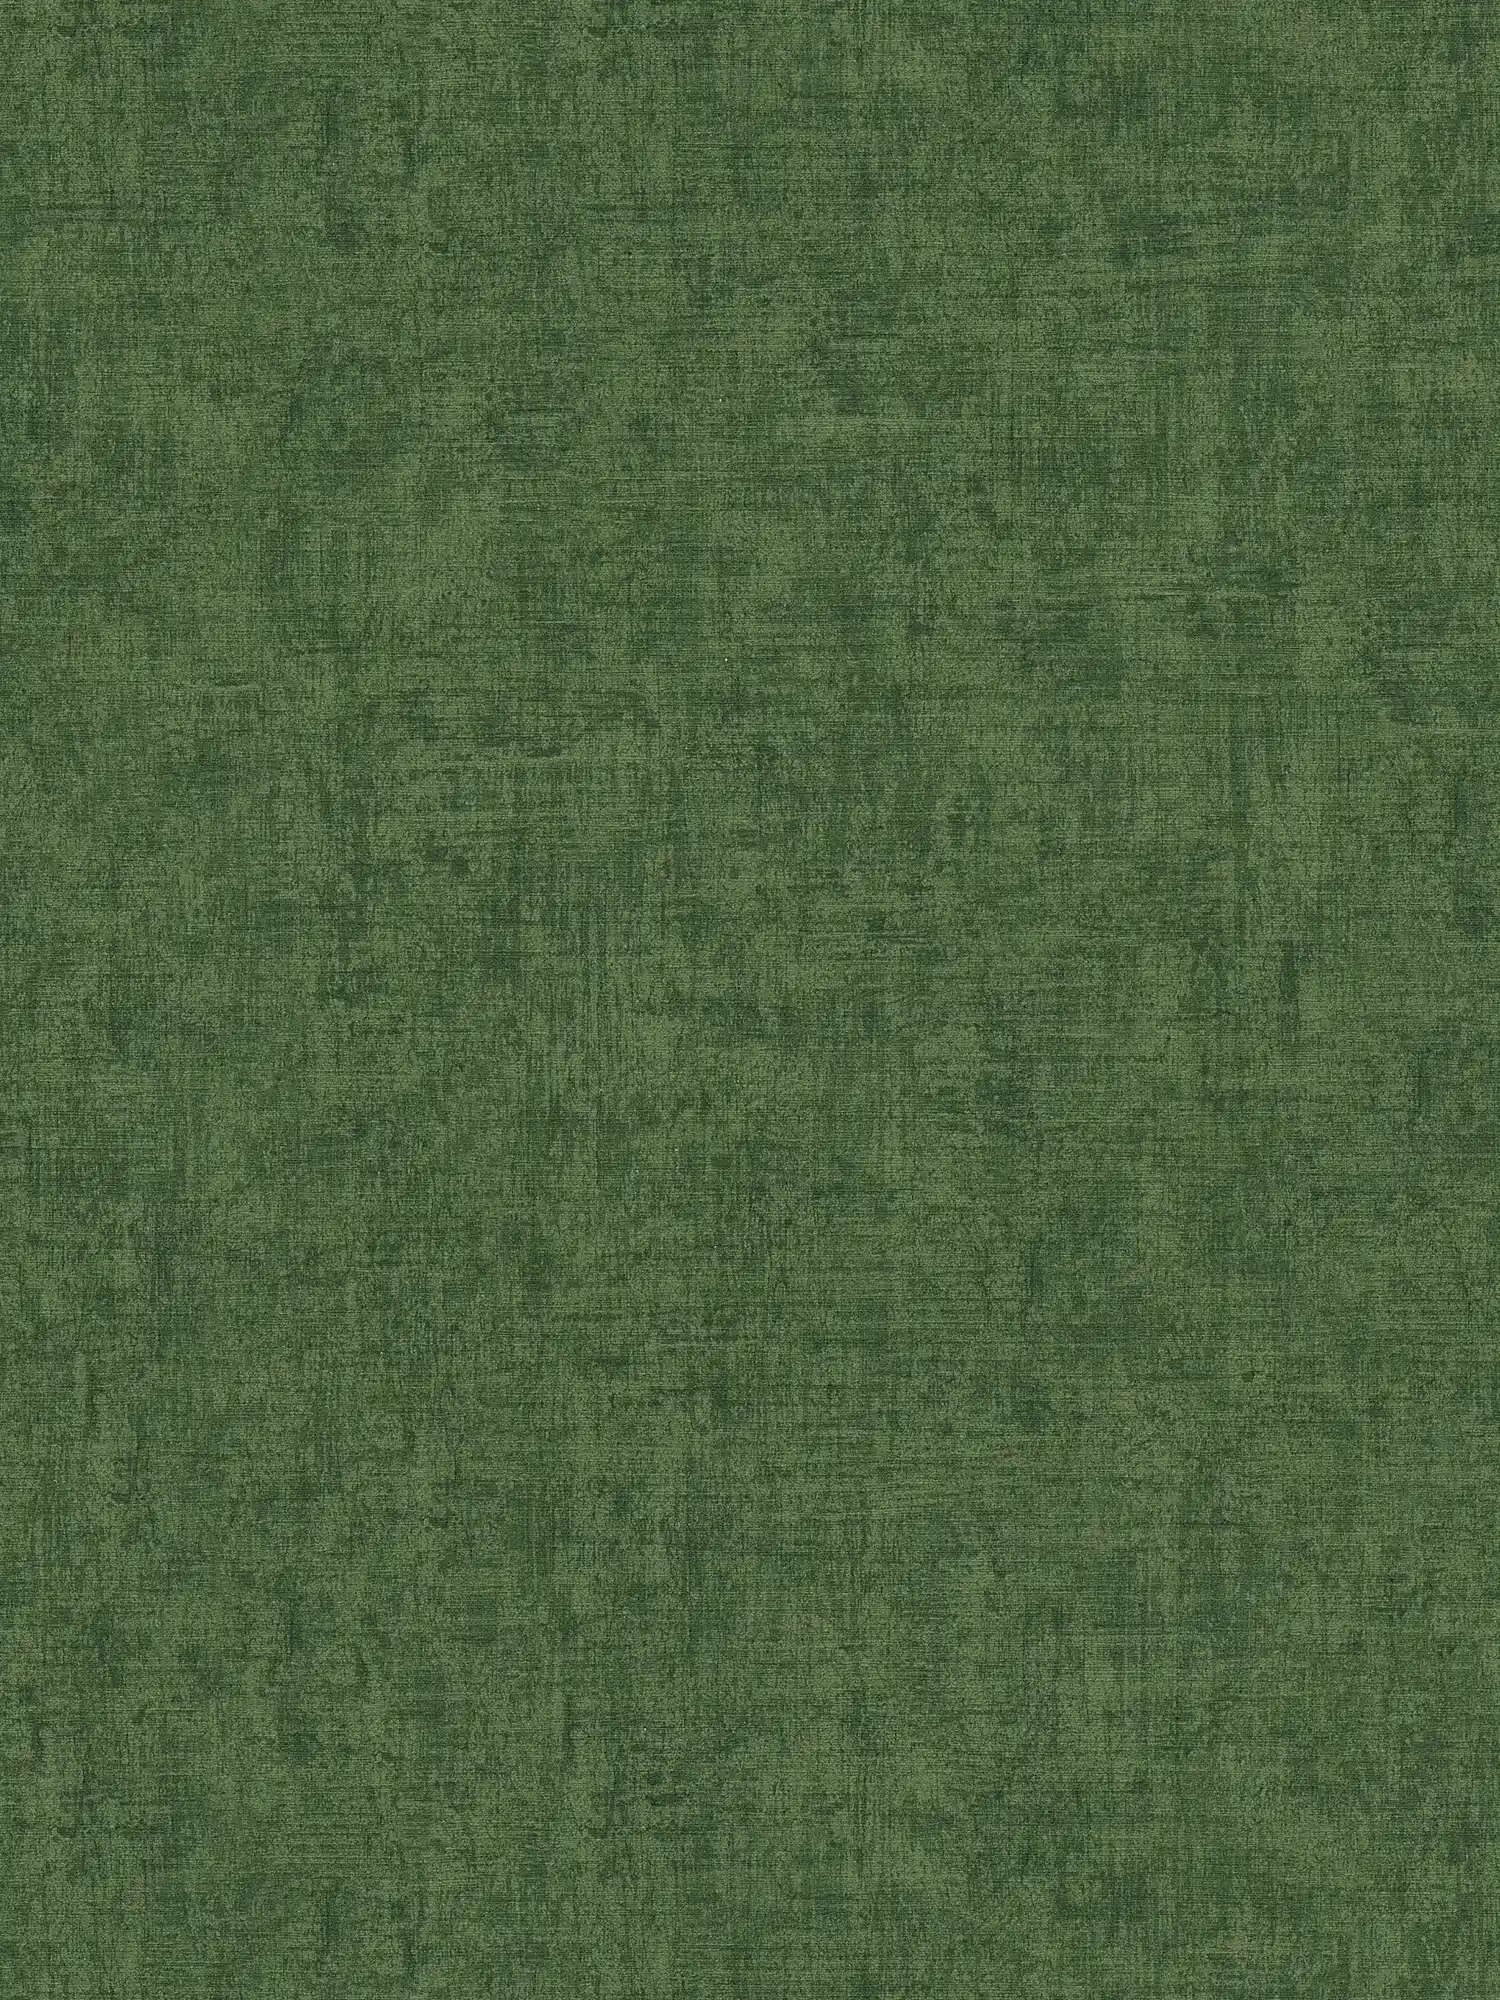 Melange plain wallpaper jungle green with structure embossing
